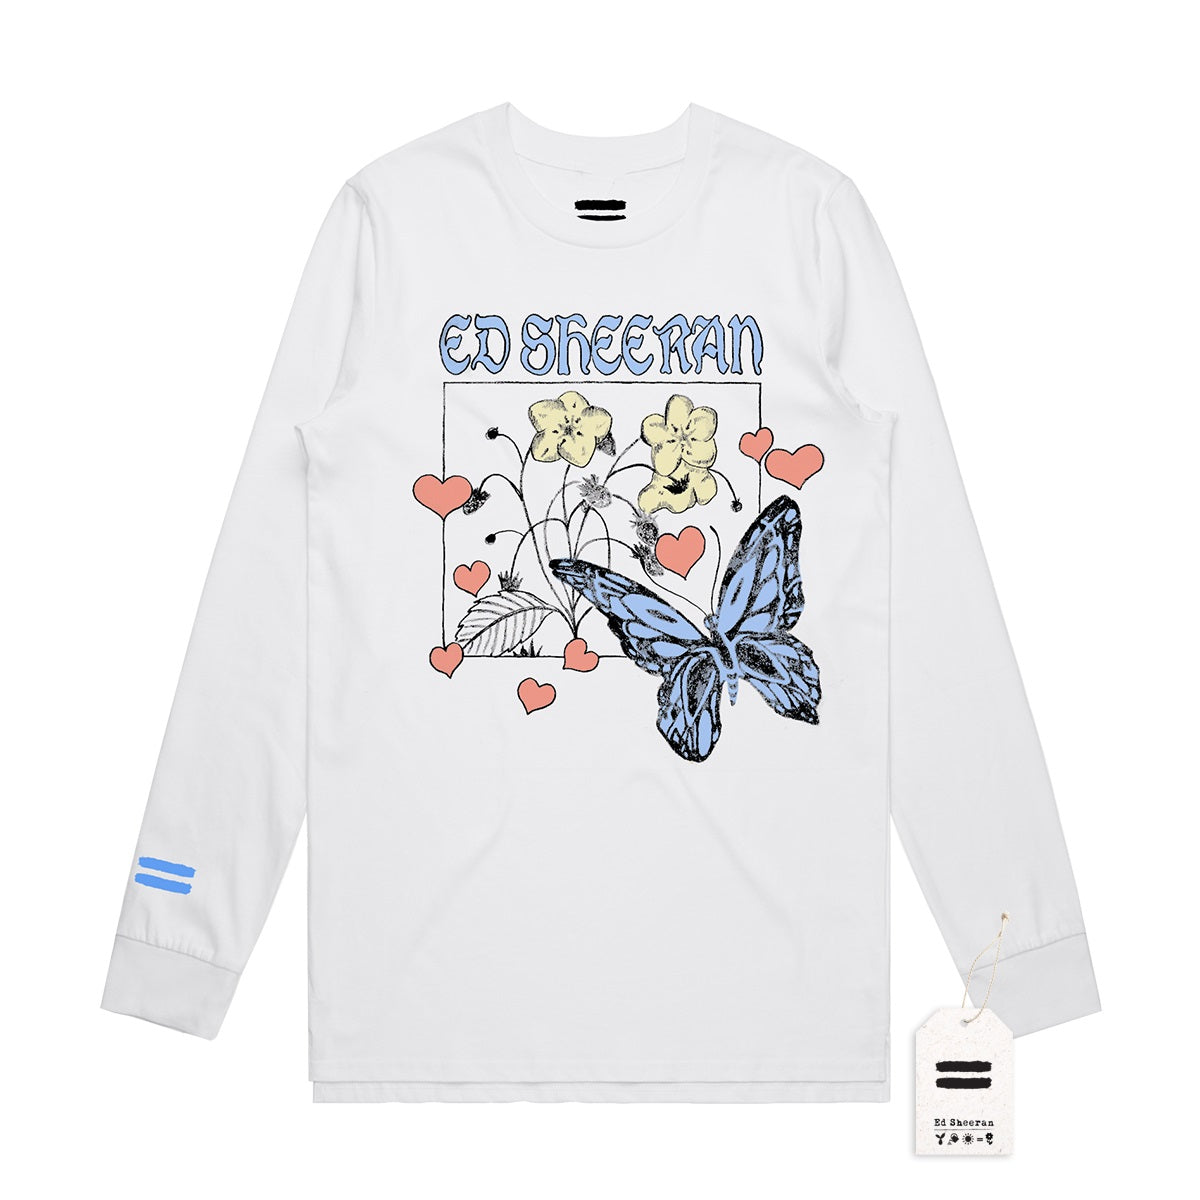 Wild Hearts and Butterflies White Longsleeve